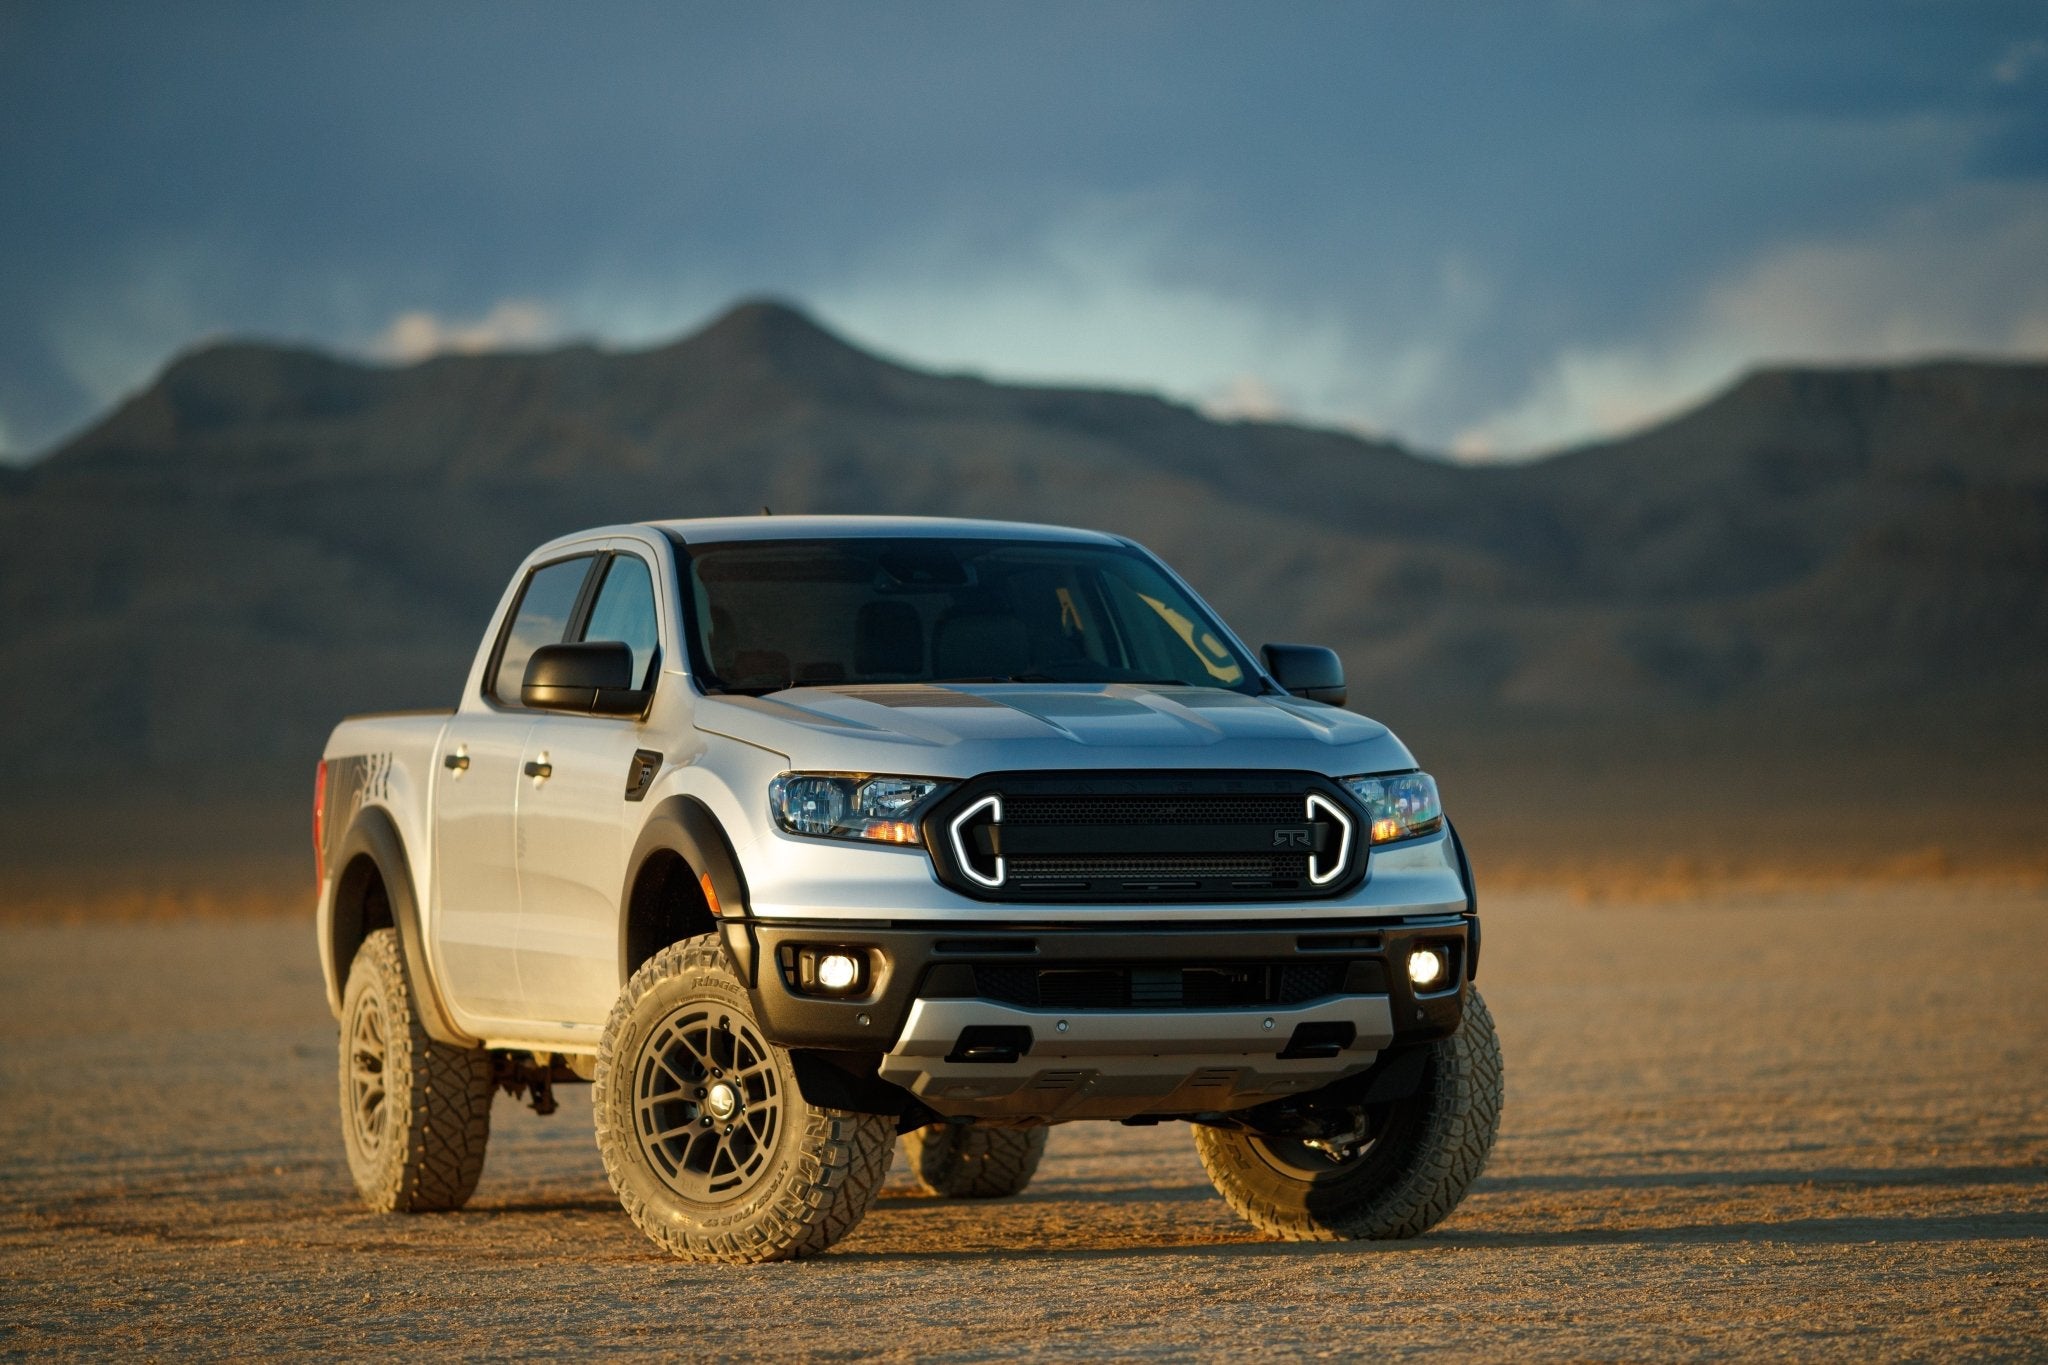 RTR VEHICLES INTRODUCES 2020 FORD RANGER RTR AND FORD RANGER RTR ‘RAMBLER’ AT 2019 SEMA SHOW